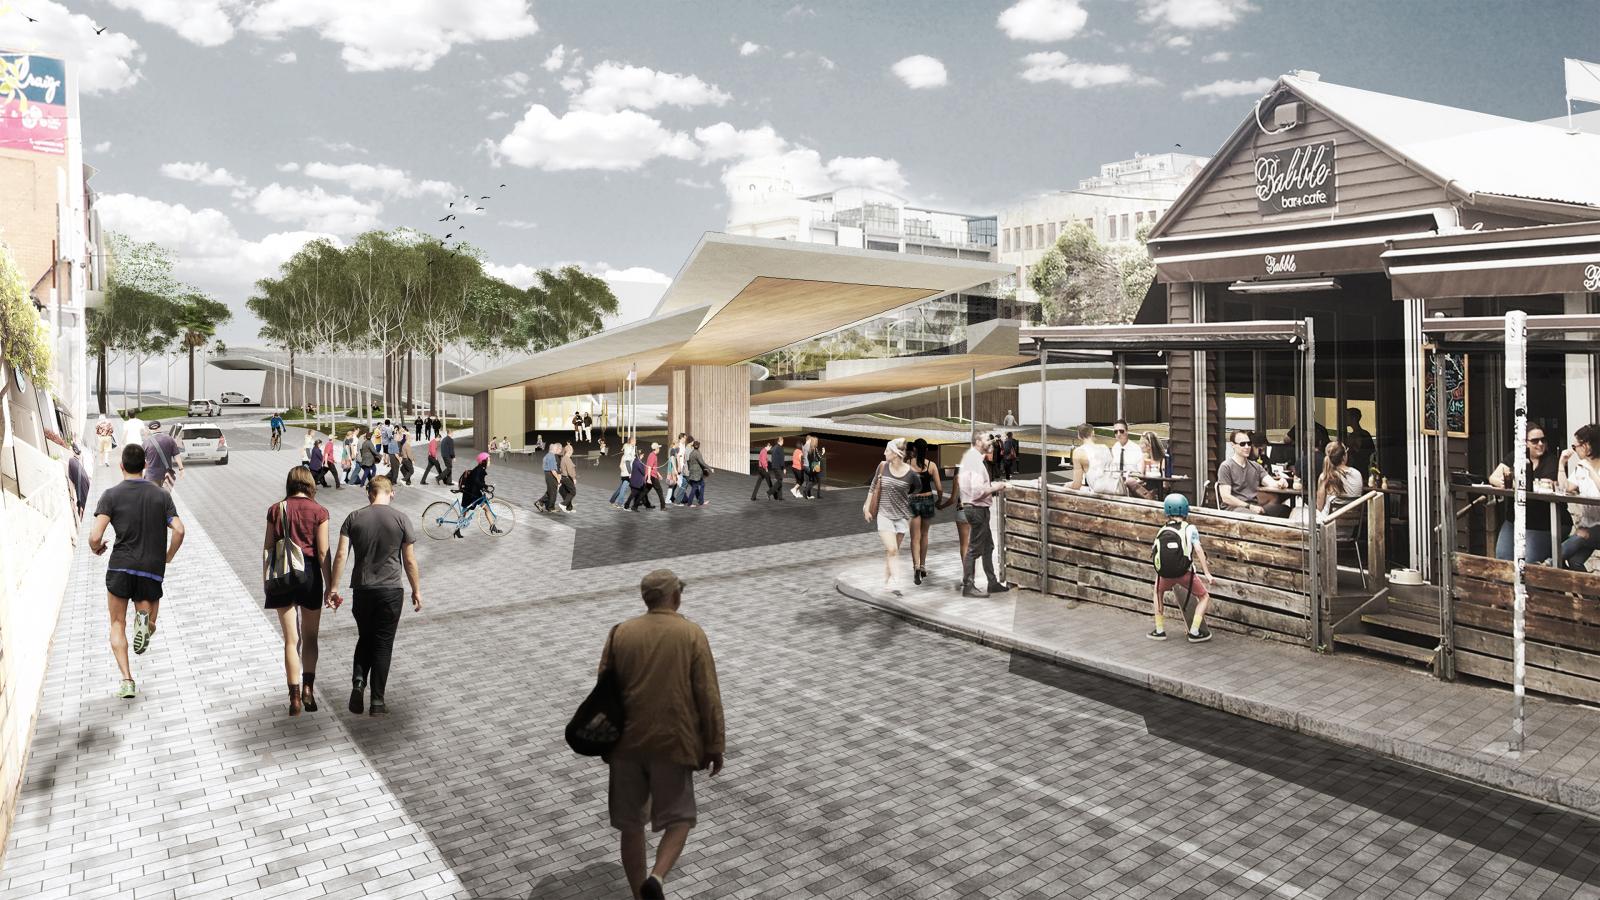 An architectural rendering shows a plaza with people walking, dining, and cycling. Modern structures with large overhangs stand in the center, flanked by a traditional building on Cato St to the right. Trees and a cloudy sky are in the background, creating a vibrant urban scene near the car park.